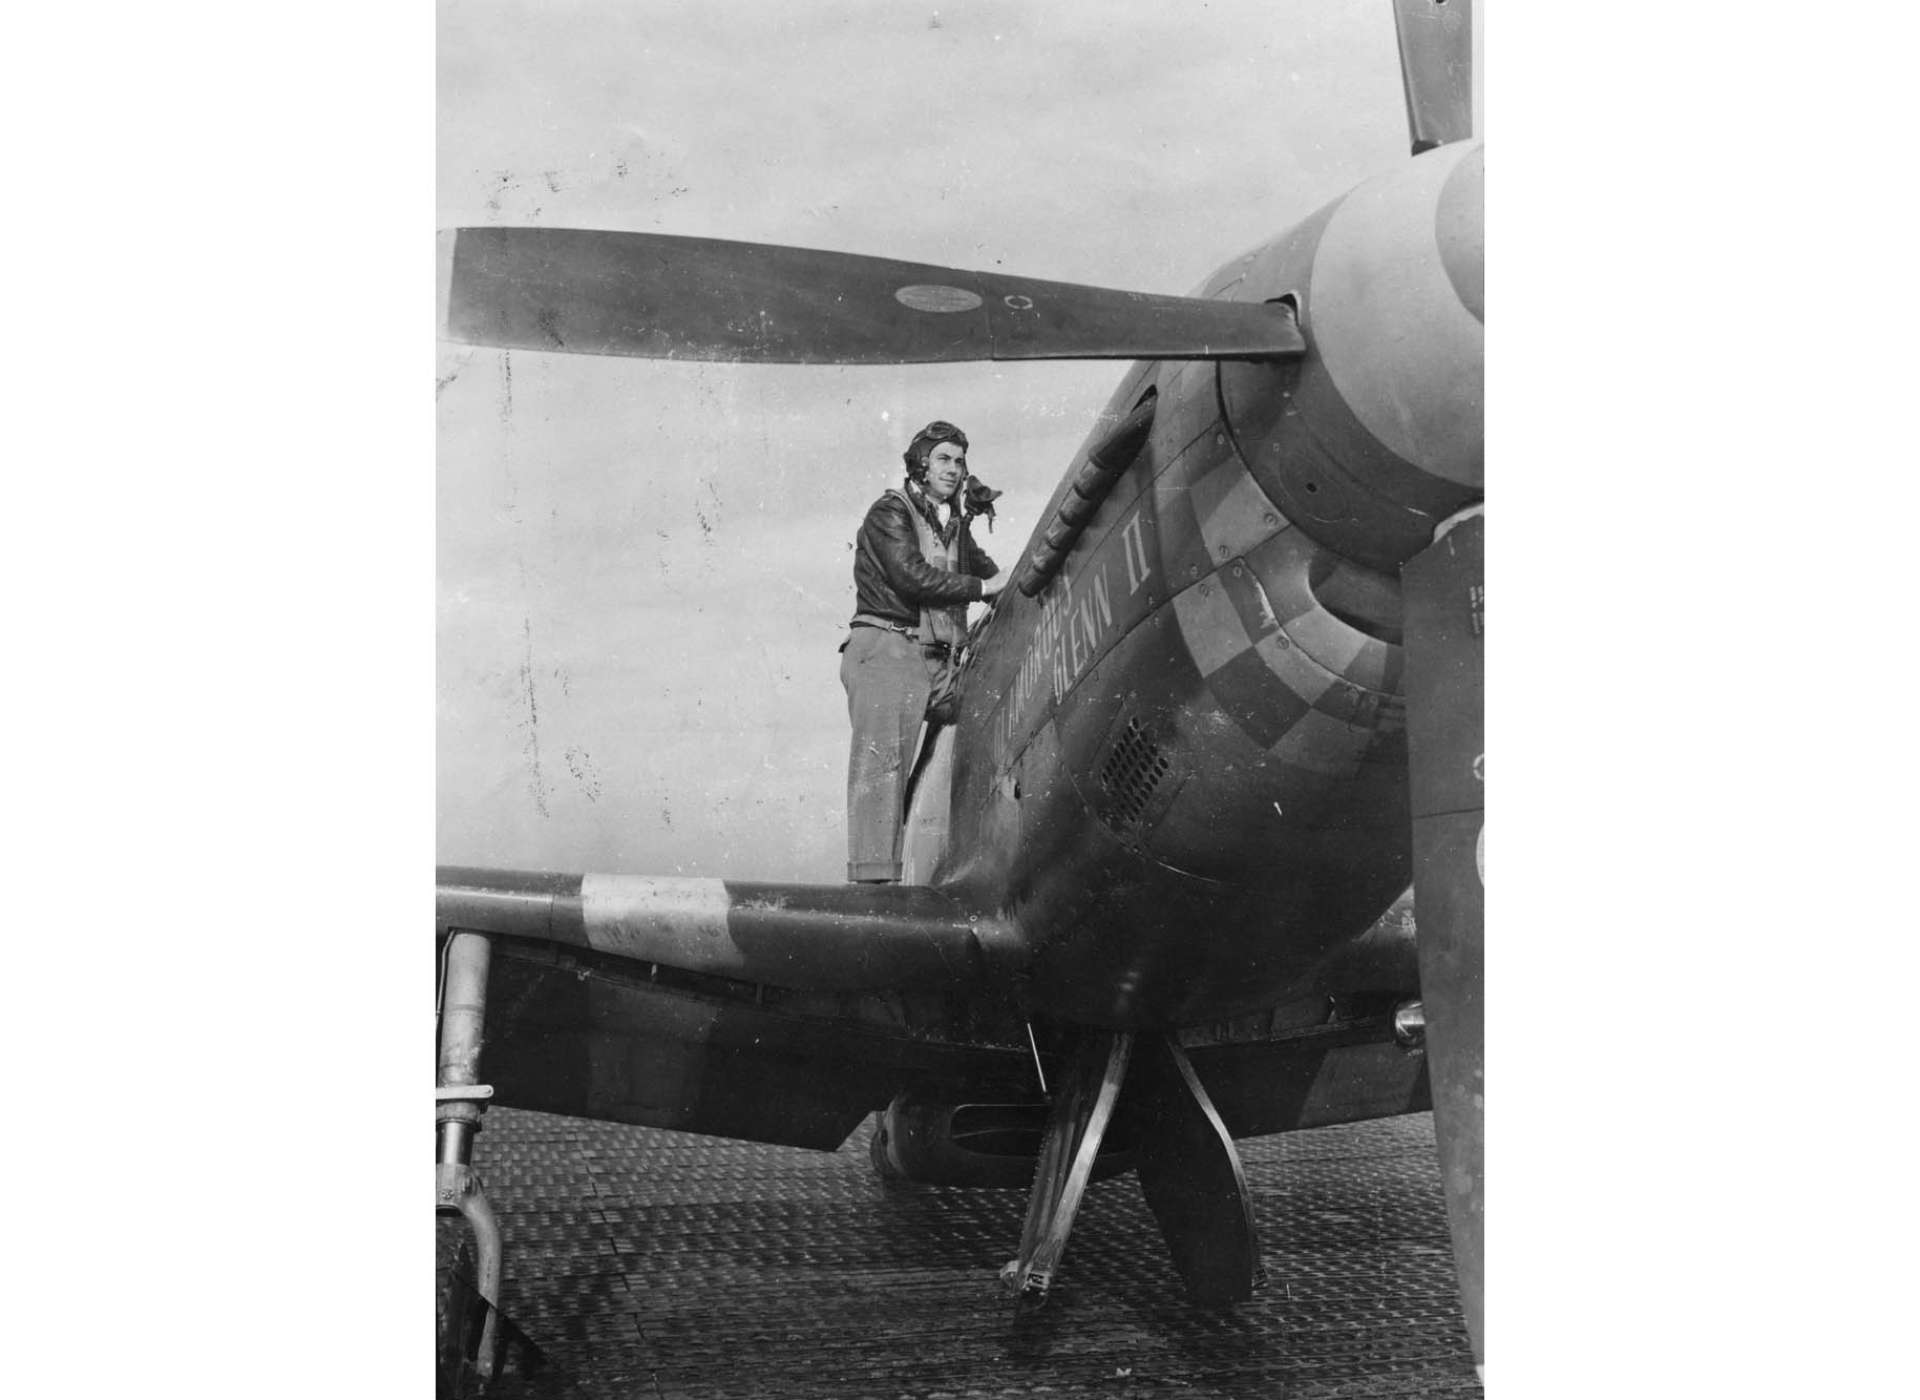 1st Lieutenant Charles E. Yeager with Glamorous Glenn II (Image: American Air Museum in Britain)